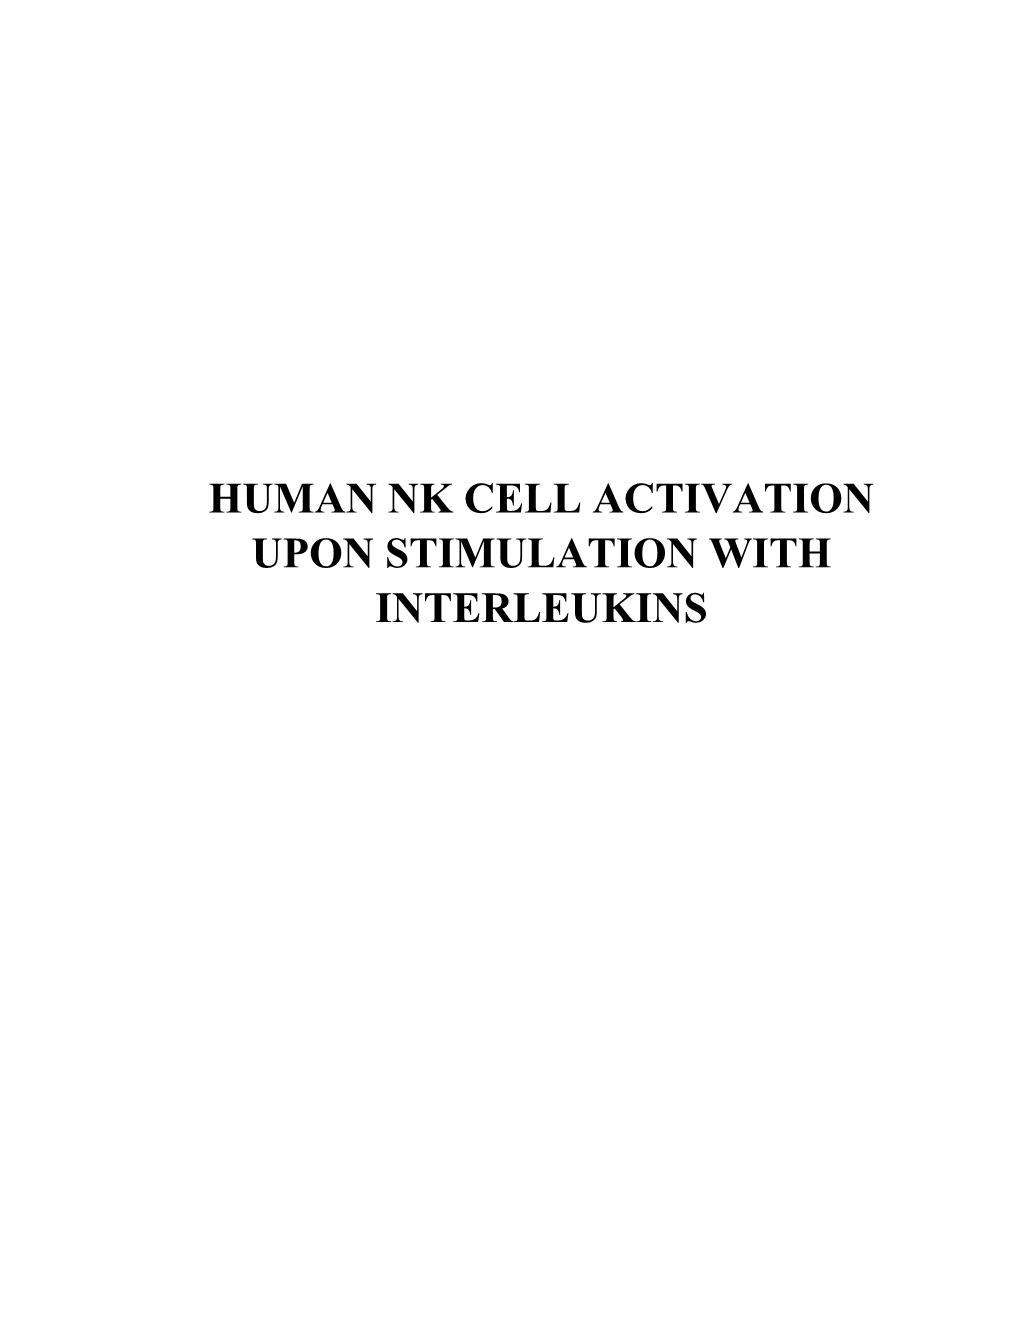 Human Nk Cell Activation Upon Stimulation with Interleukins